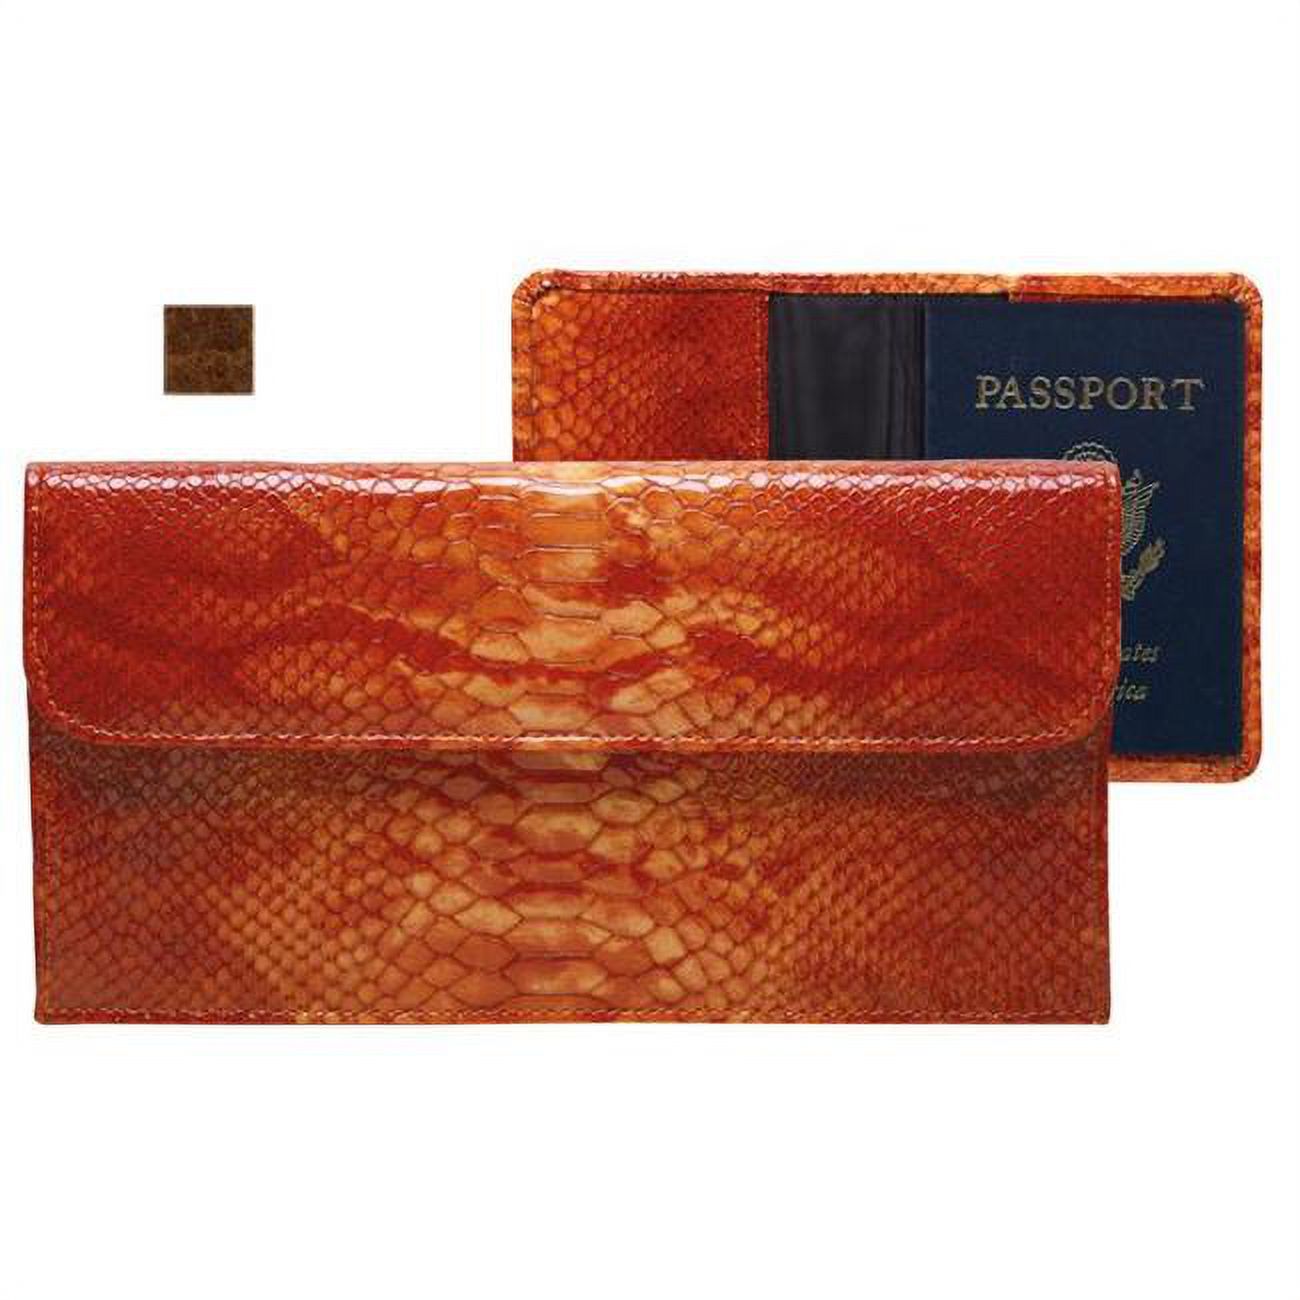 Leather Travel Pouch with Passport Cover - image 1 of 2